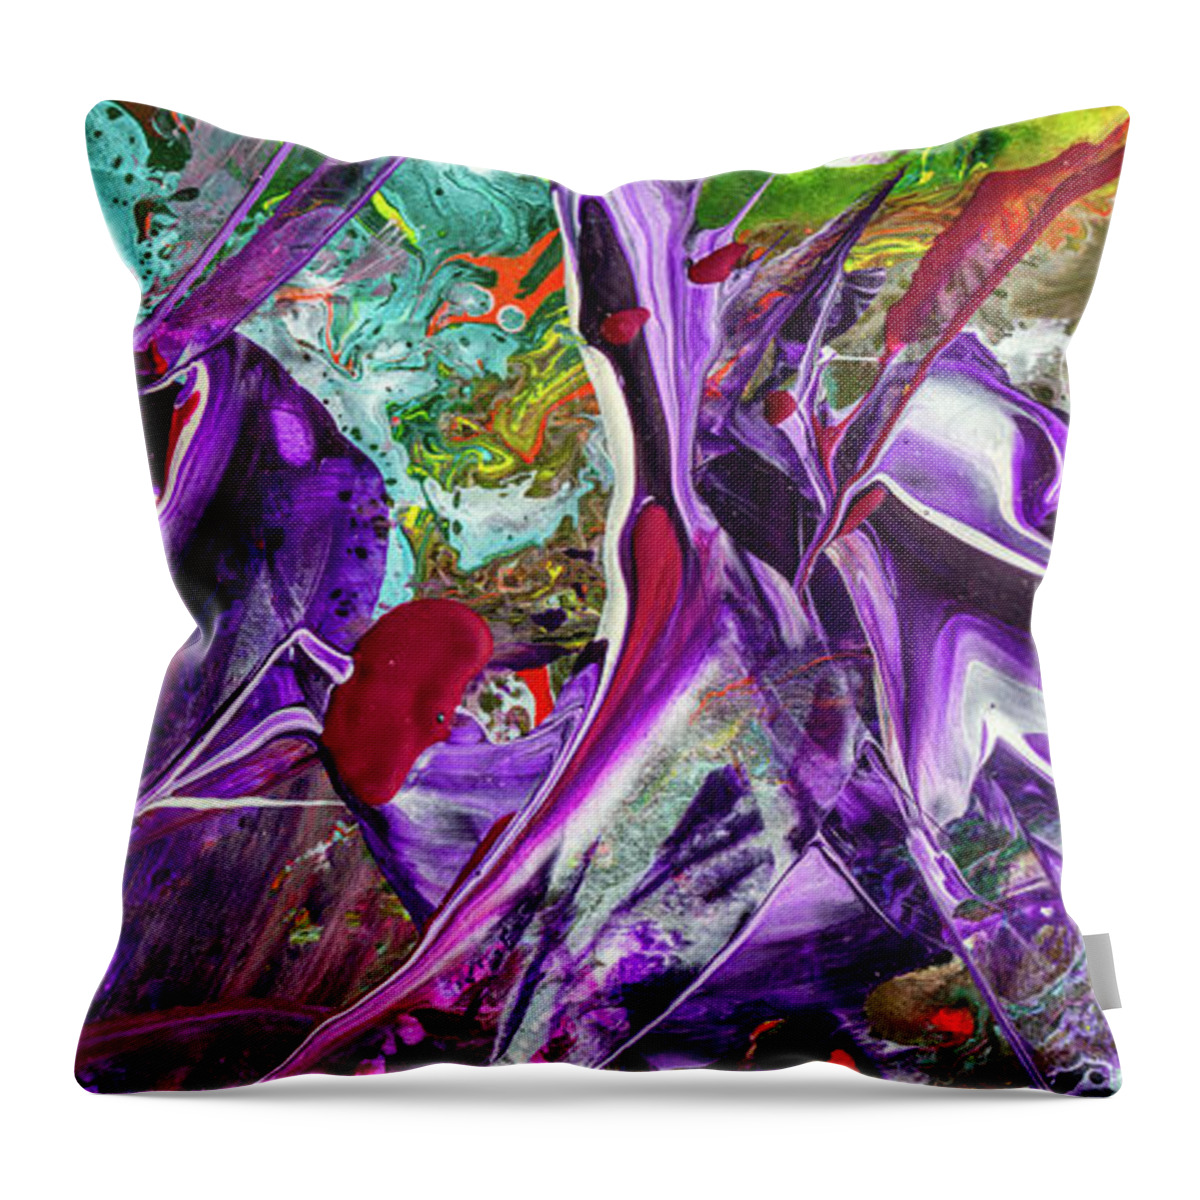 Lord Of The Rings Art Throw Pillow featuring the painting Lord Of The Rings Art - Colorful Modern Abstract Painting by Modern Abstract